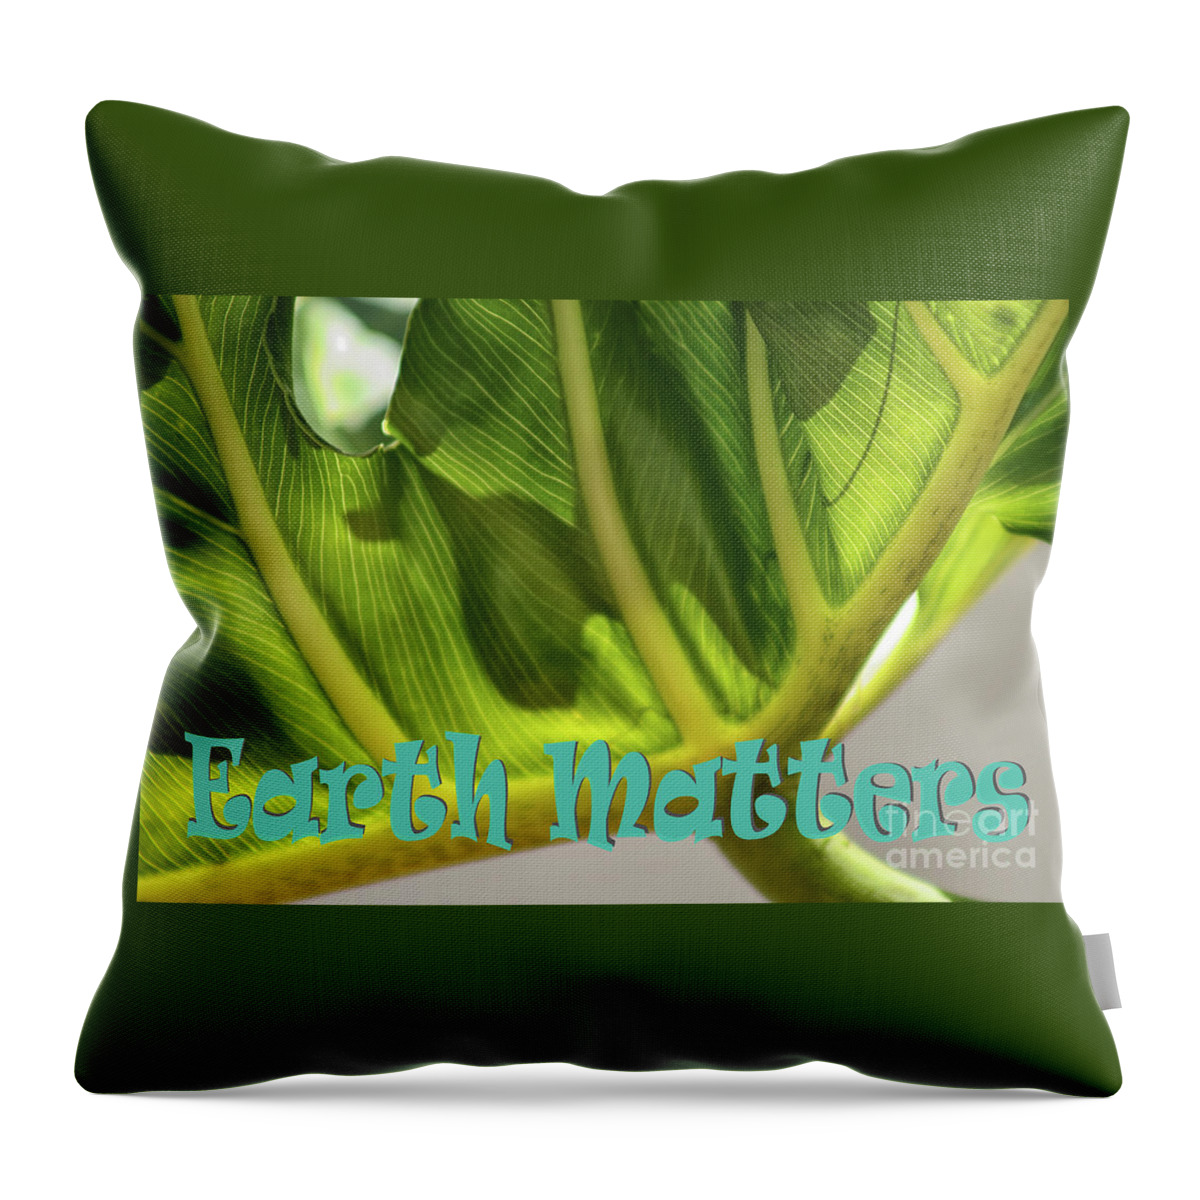 Leaf Throw Pillow featuring the photograph Earth Matters Leaf #2 by Karen Adams